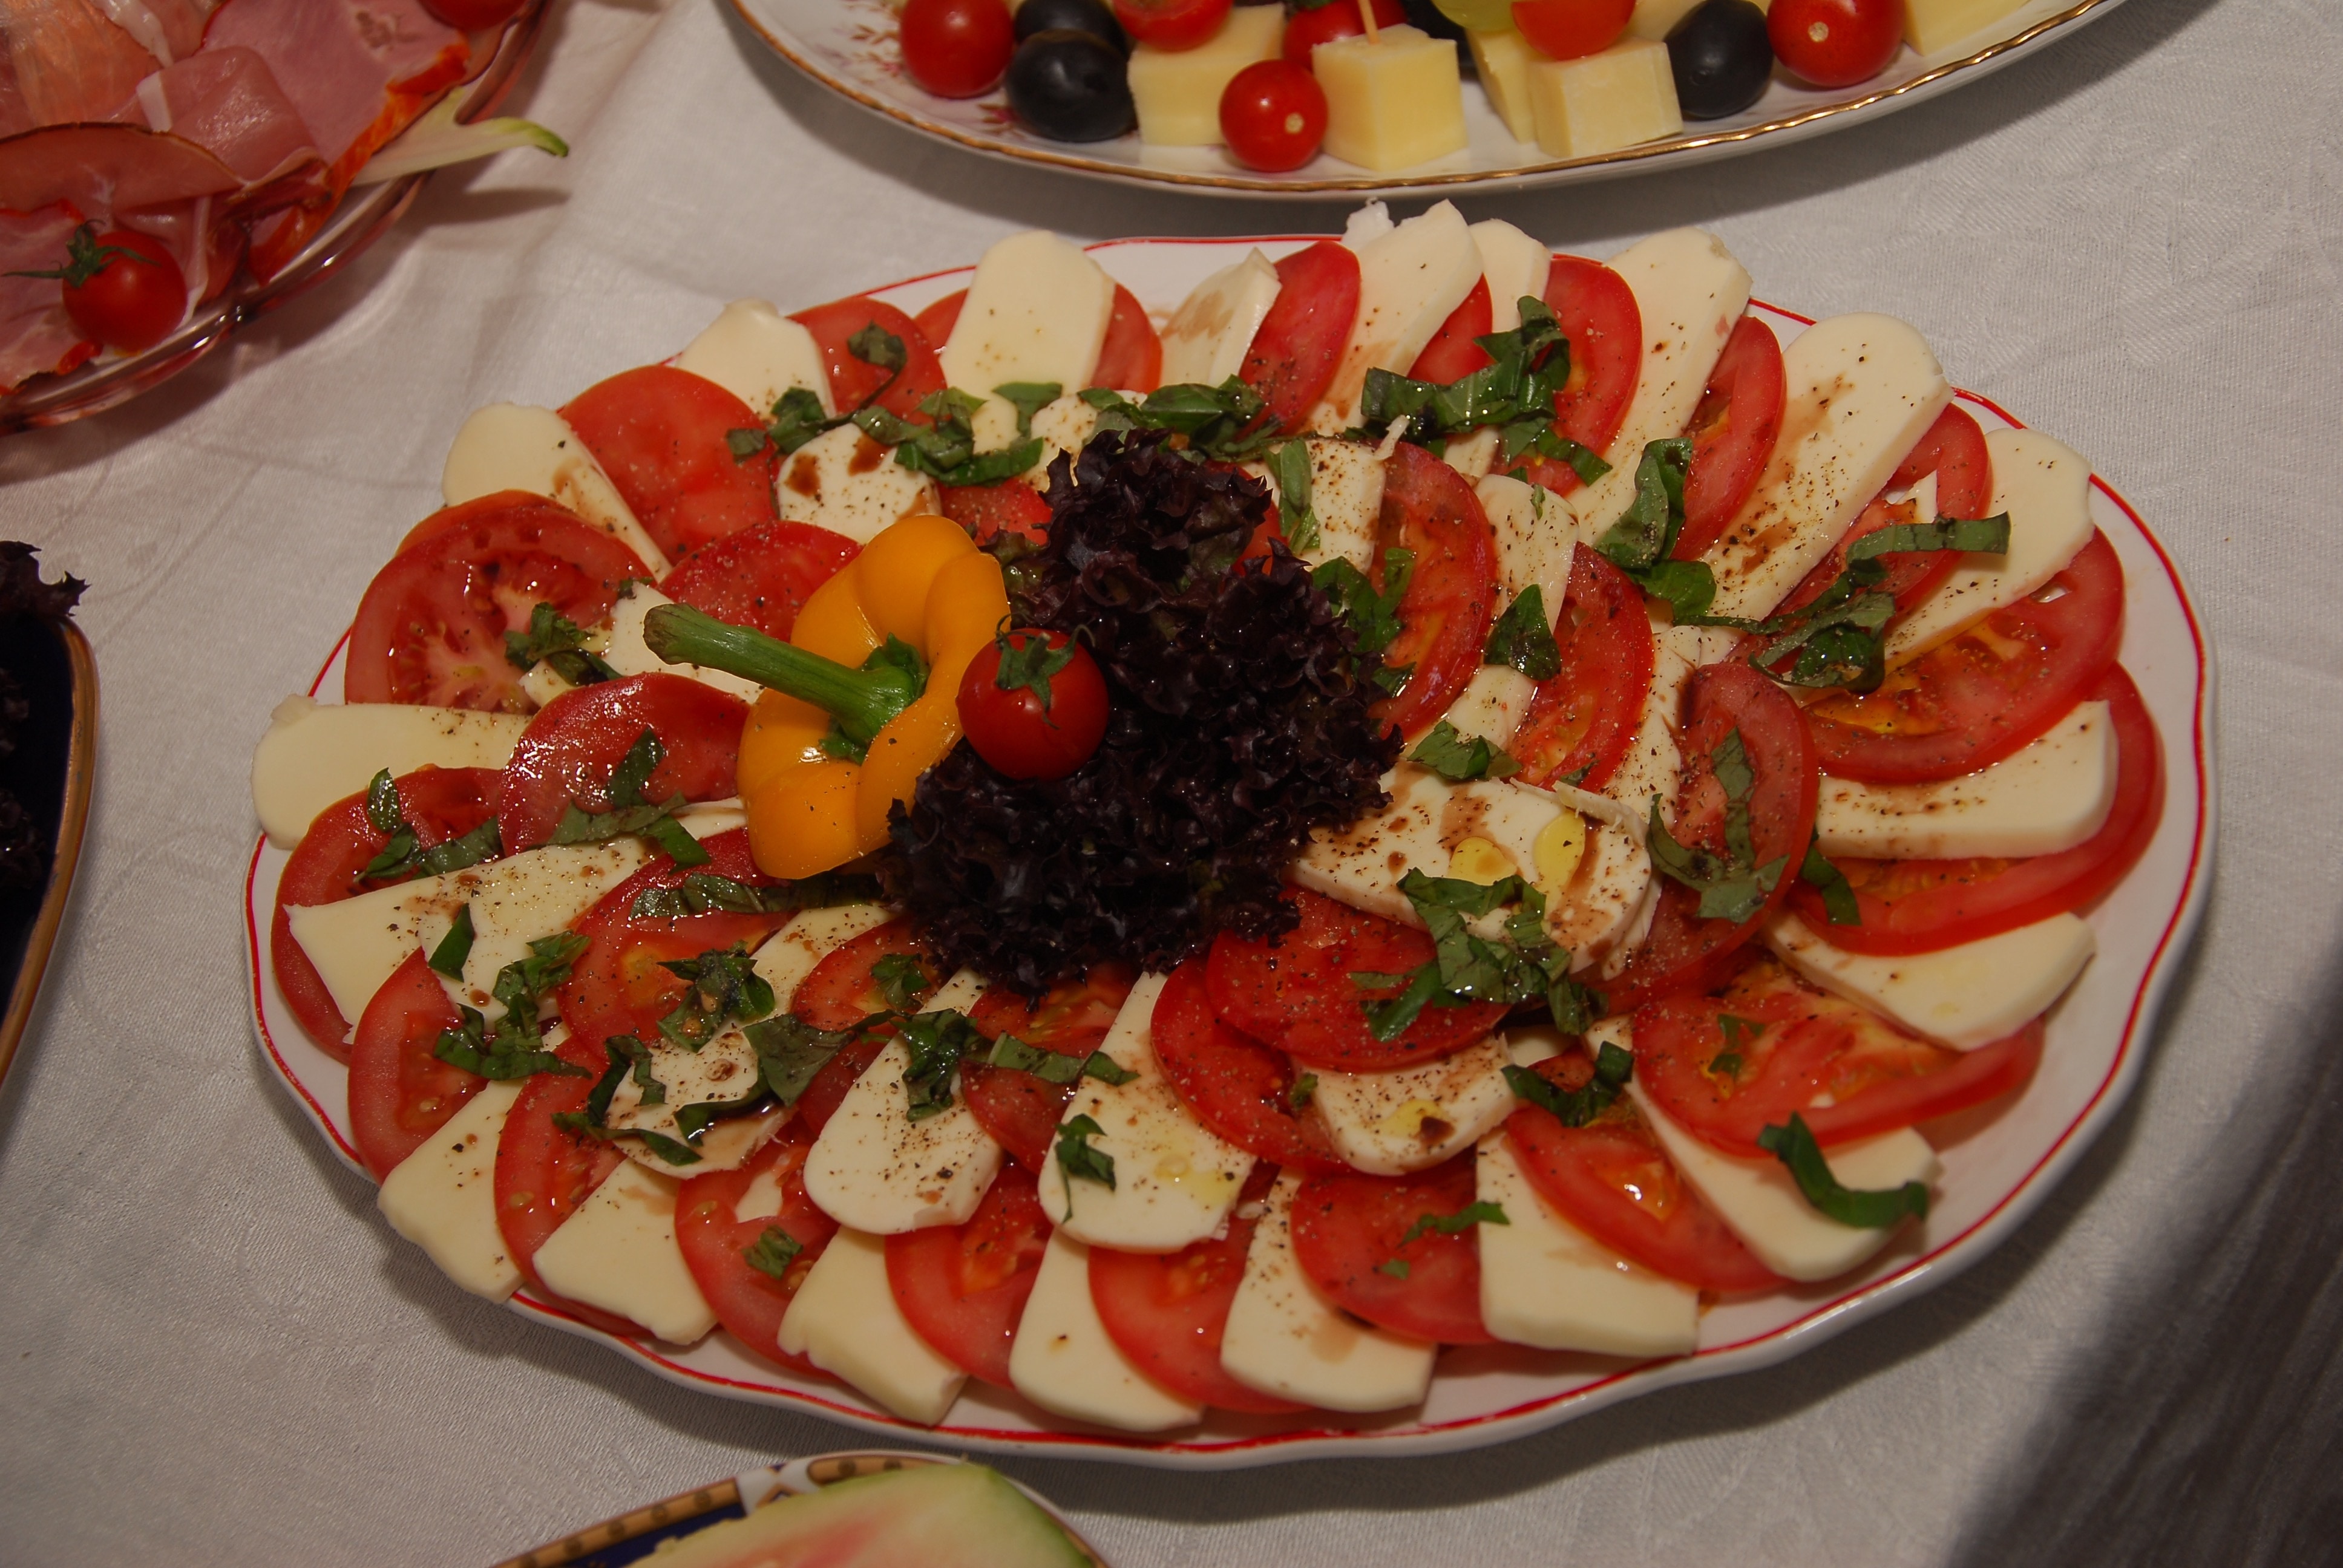 sliced tomato and white cheese platter